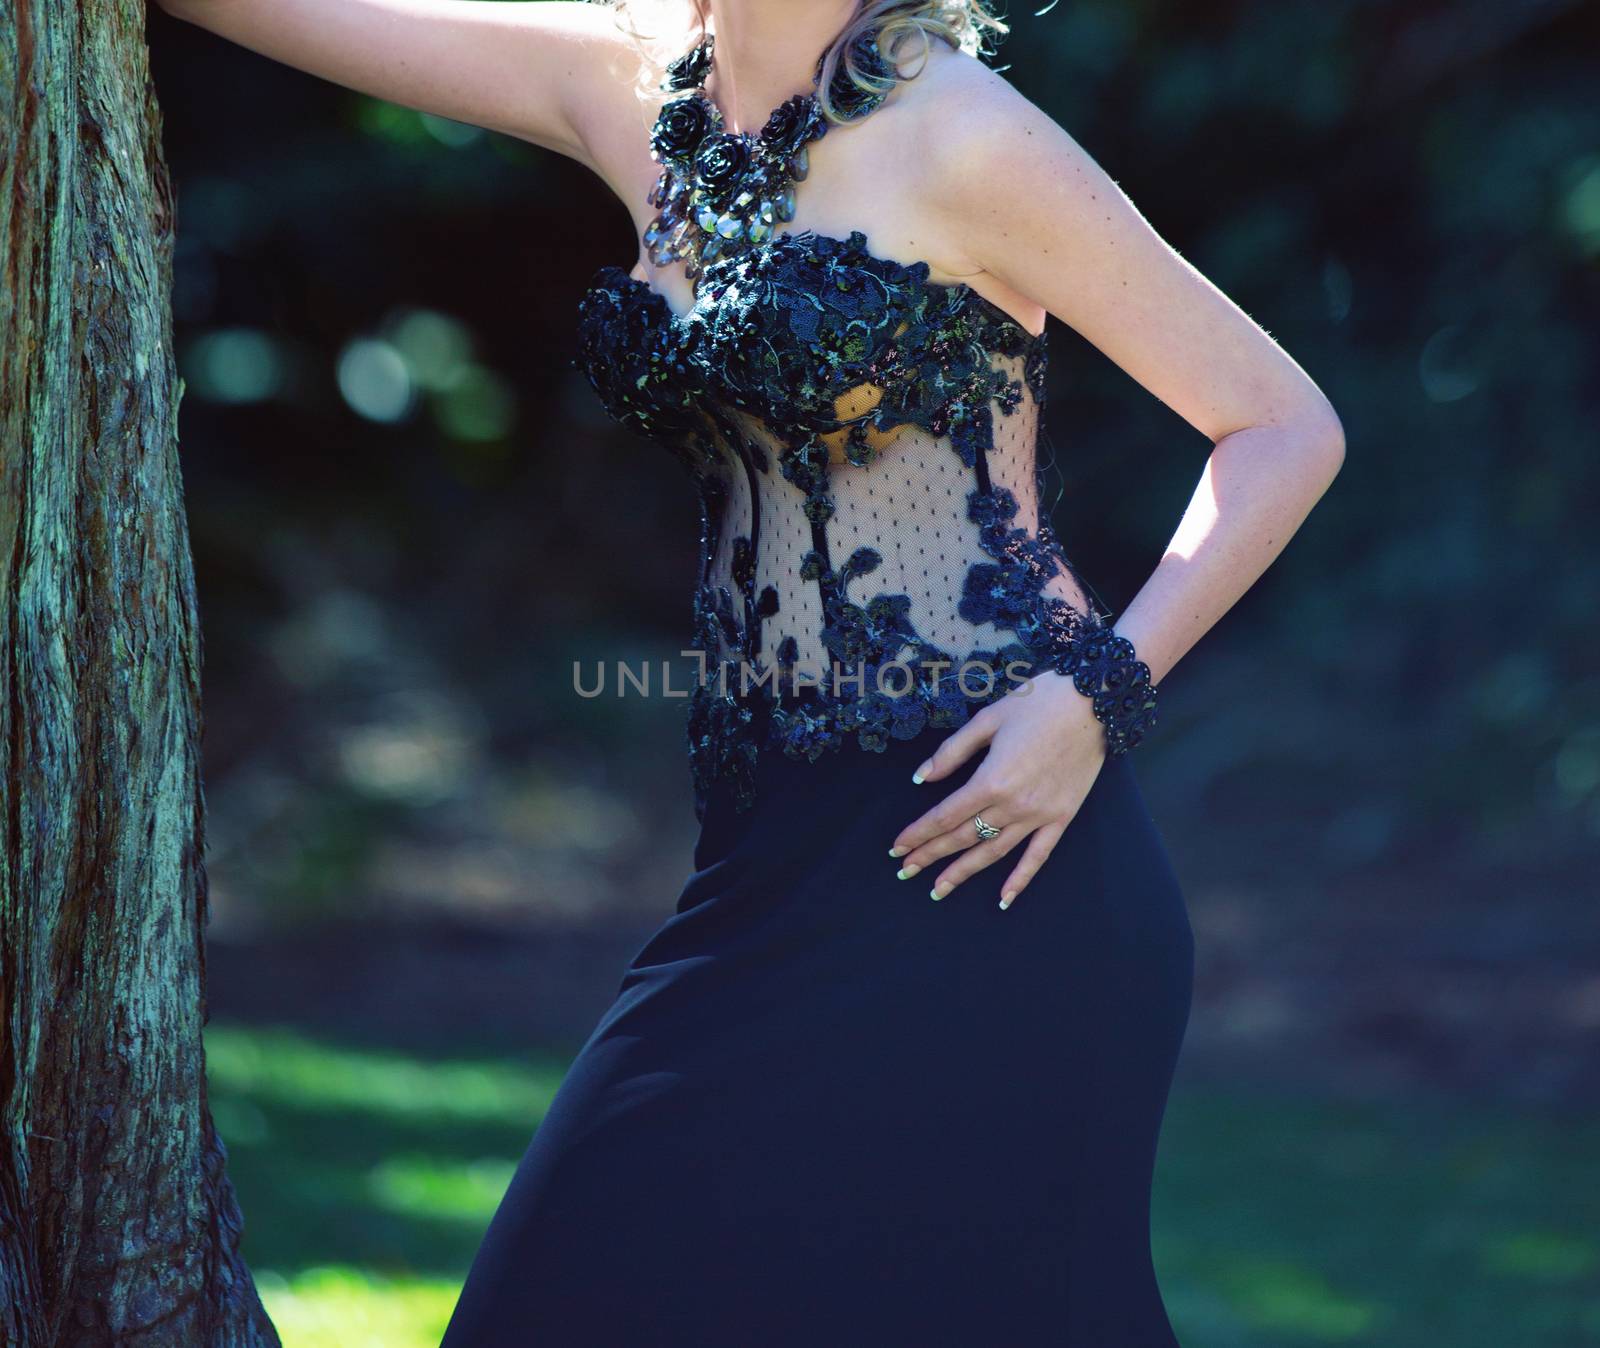 Elegant young woman posing outdoors in an embroidered black dress